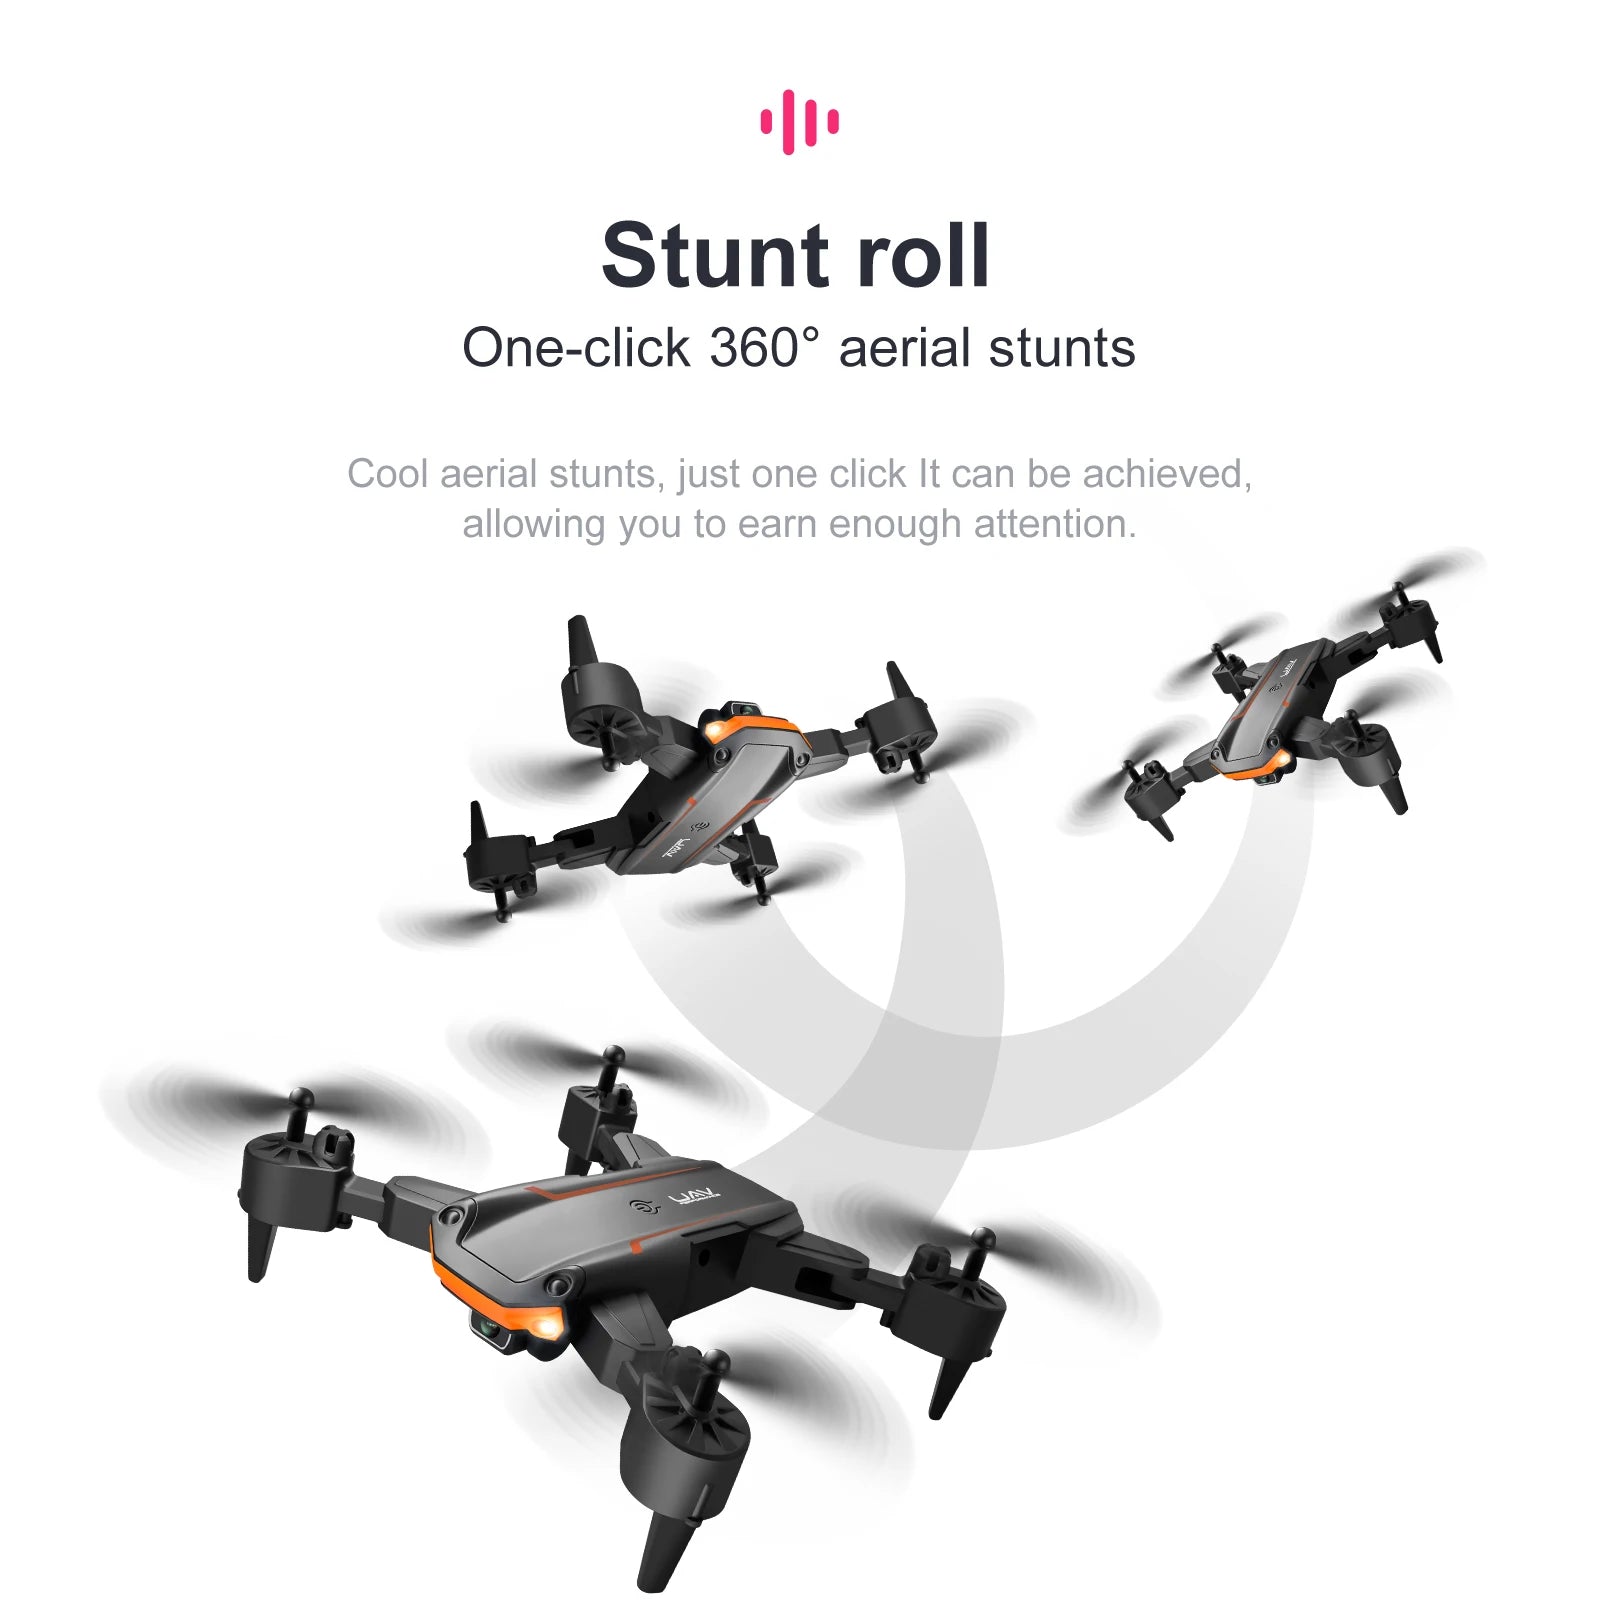 XYRC New KY603 Mini Drone, stunt roll one-click 3600 aerial stunts, just one click